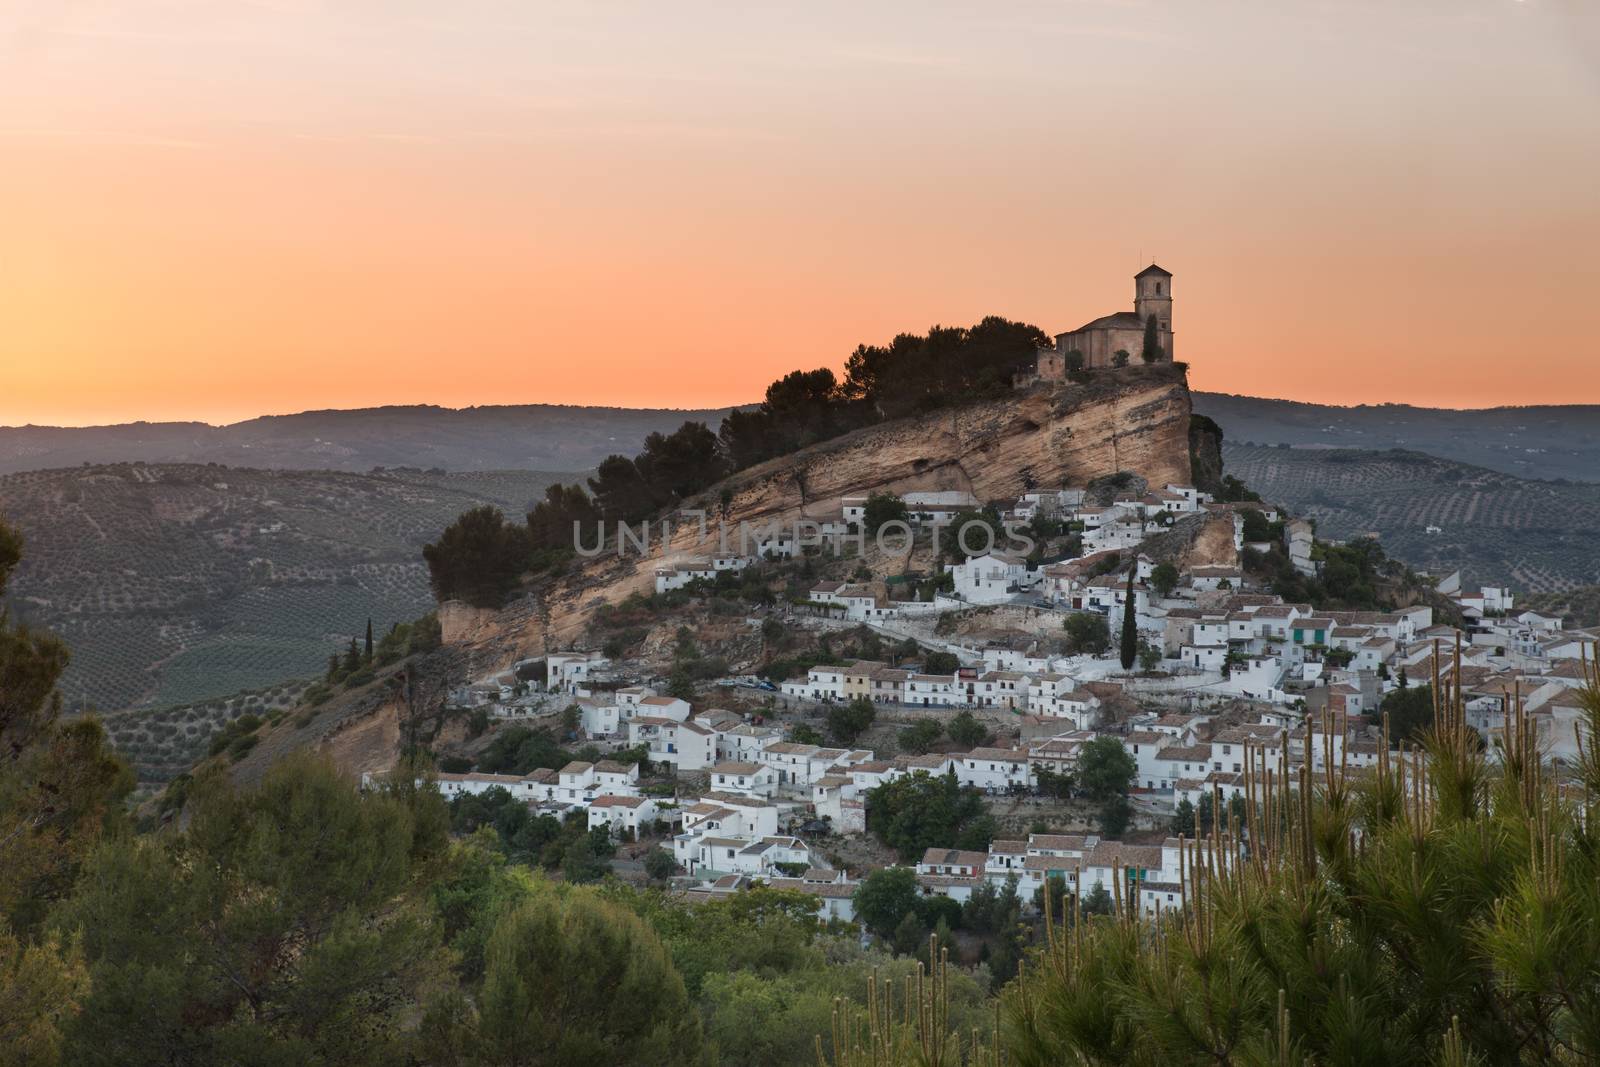 Montefrio at sunset, Province of Granada, Spain by fisfra